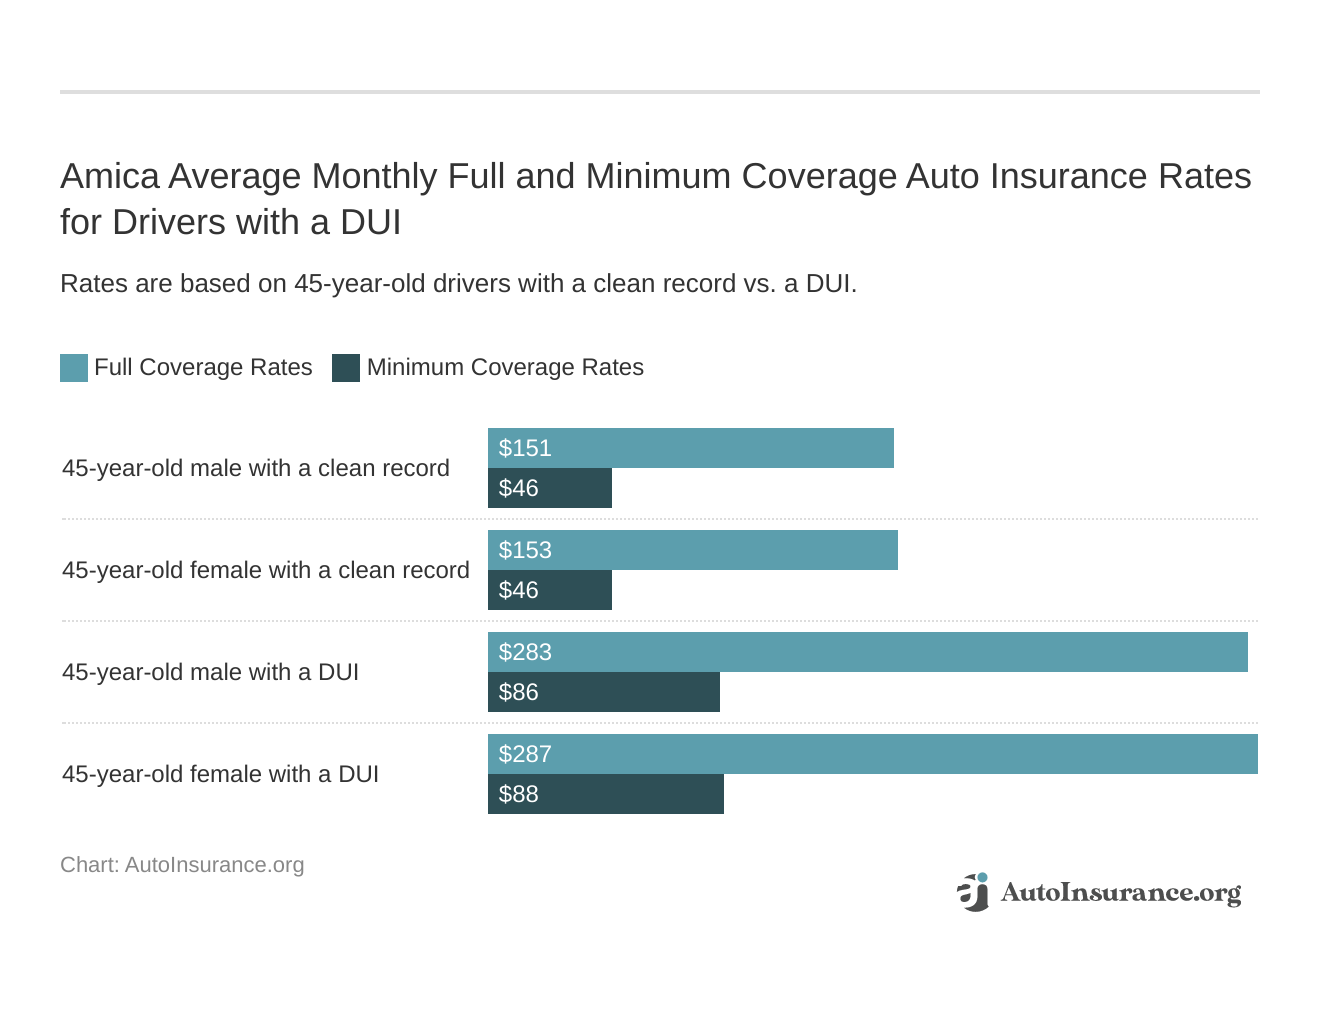 <h3>Amica Average Monthly Full and Minimum Coverage Auto Insurance Rates for Drivers with a DUI</h3>